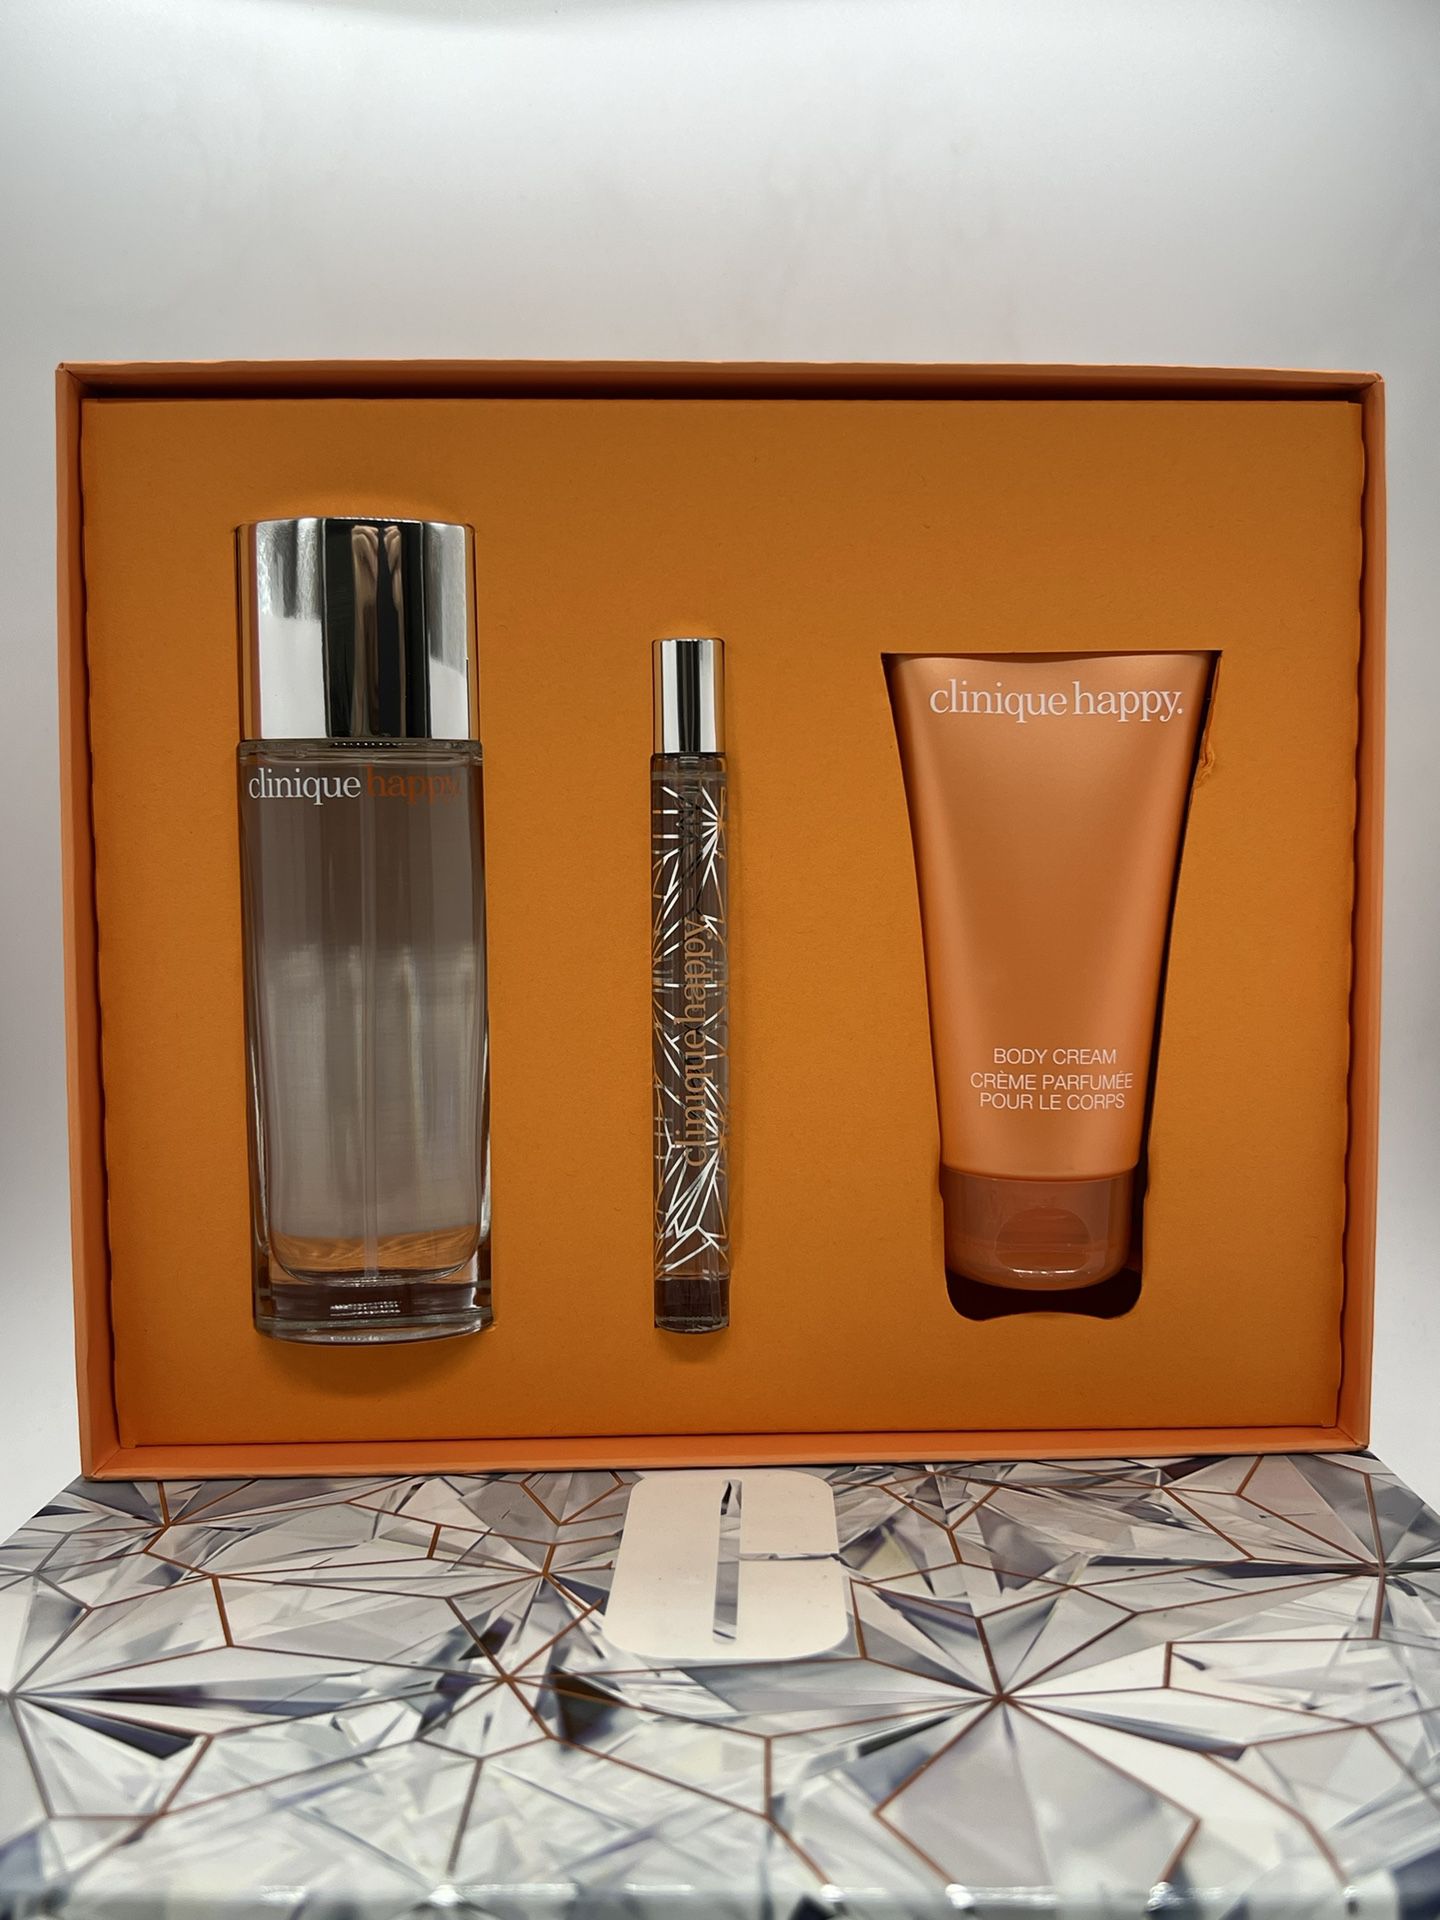 Clinique Perfectly Happy 3-Pc Gift Set